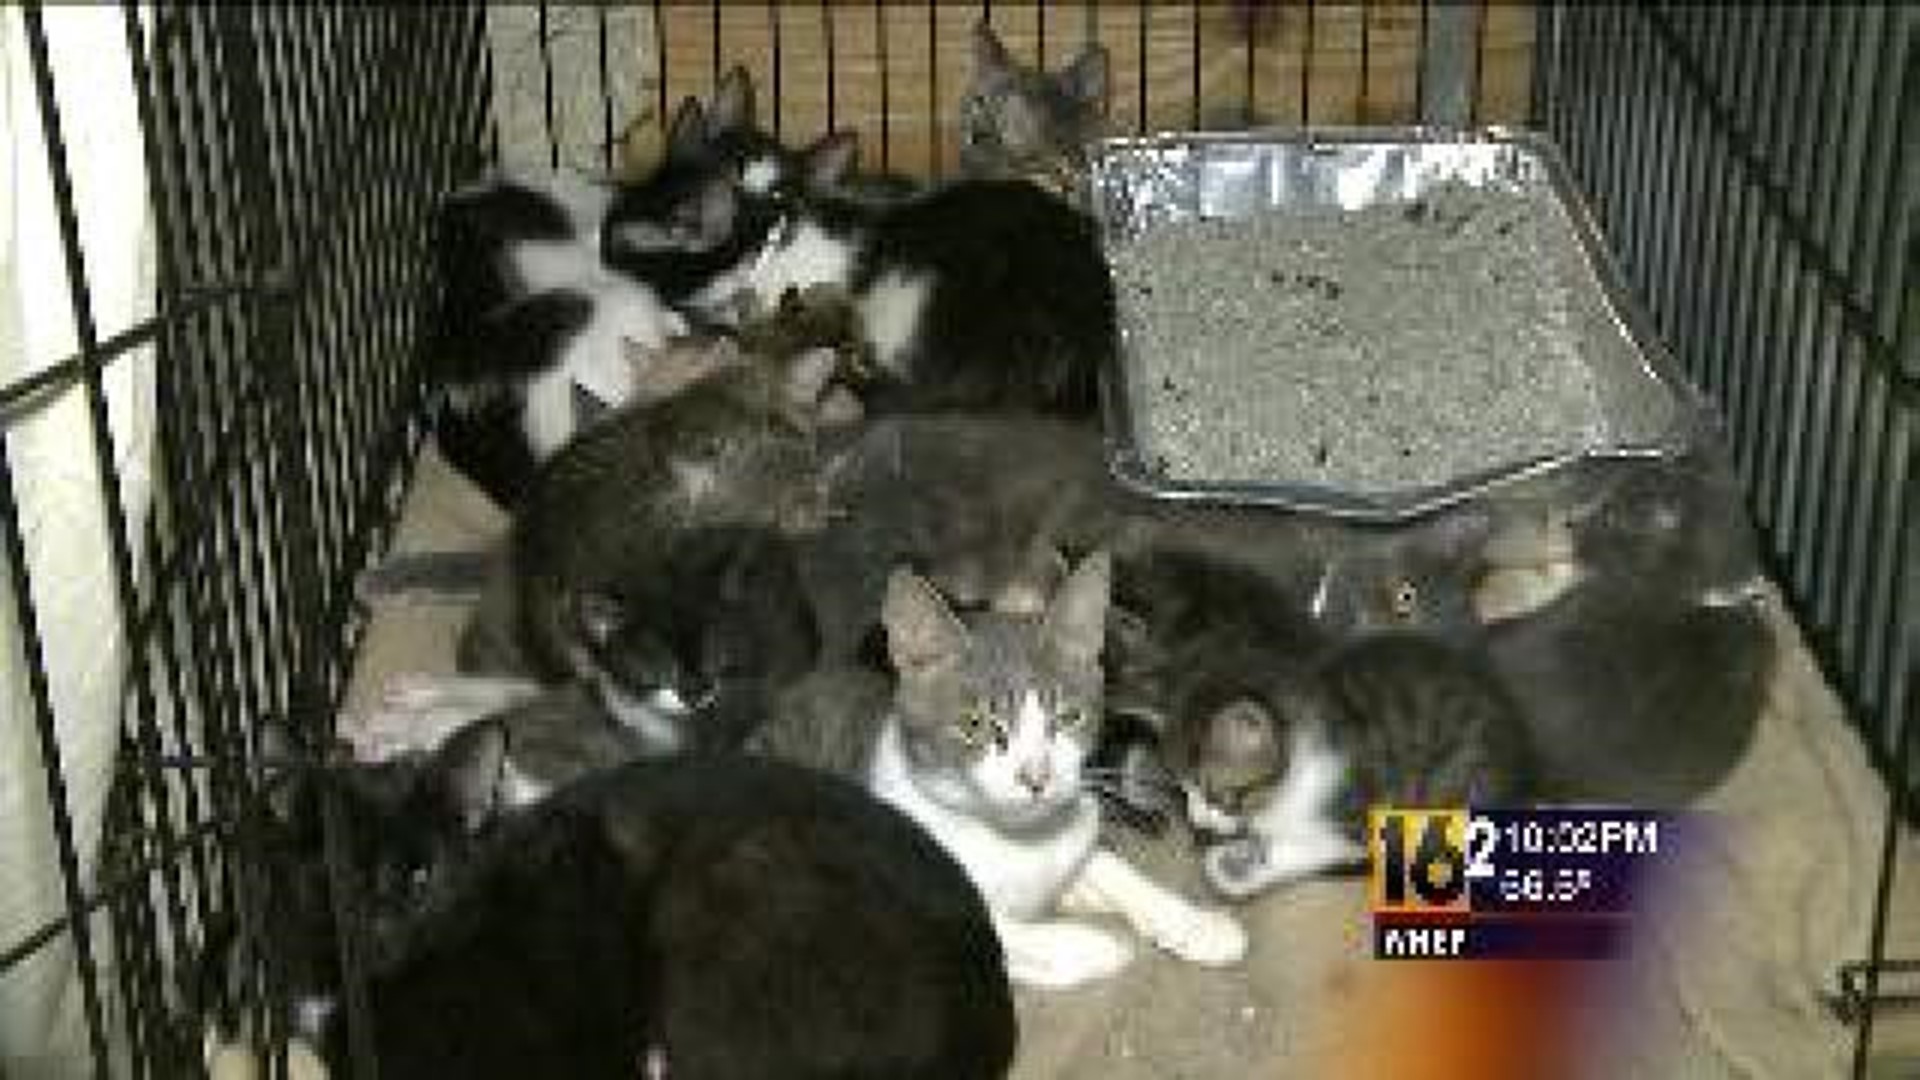 Woman Charged After More Than 50 Cats Are Removed From Her Home